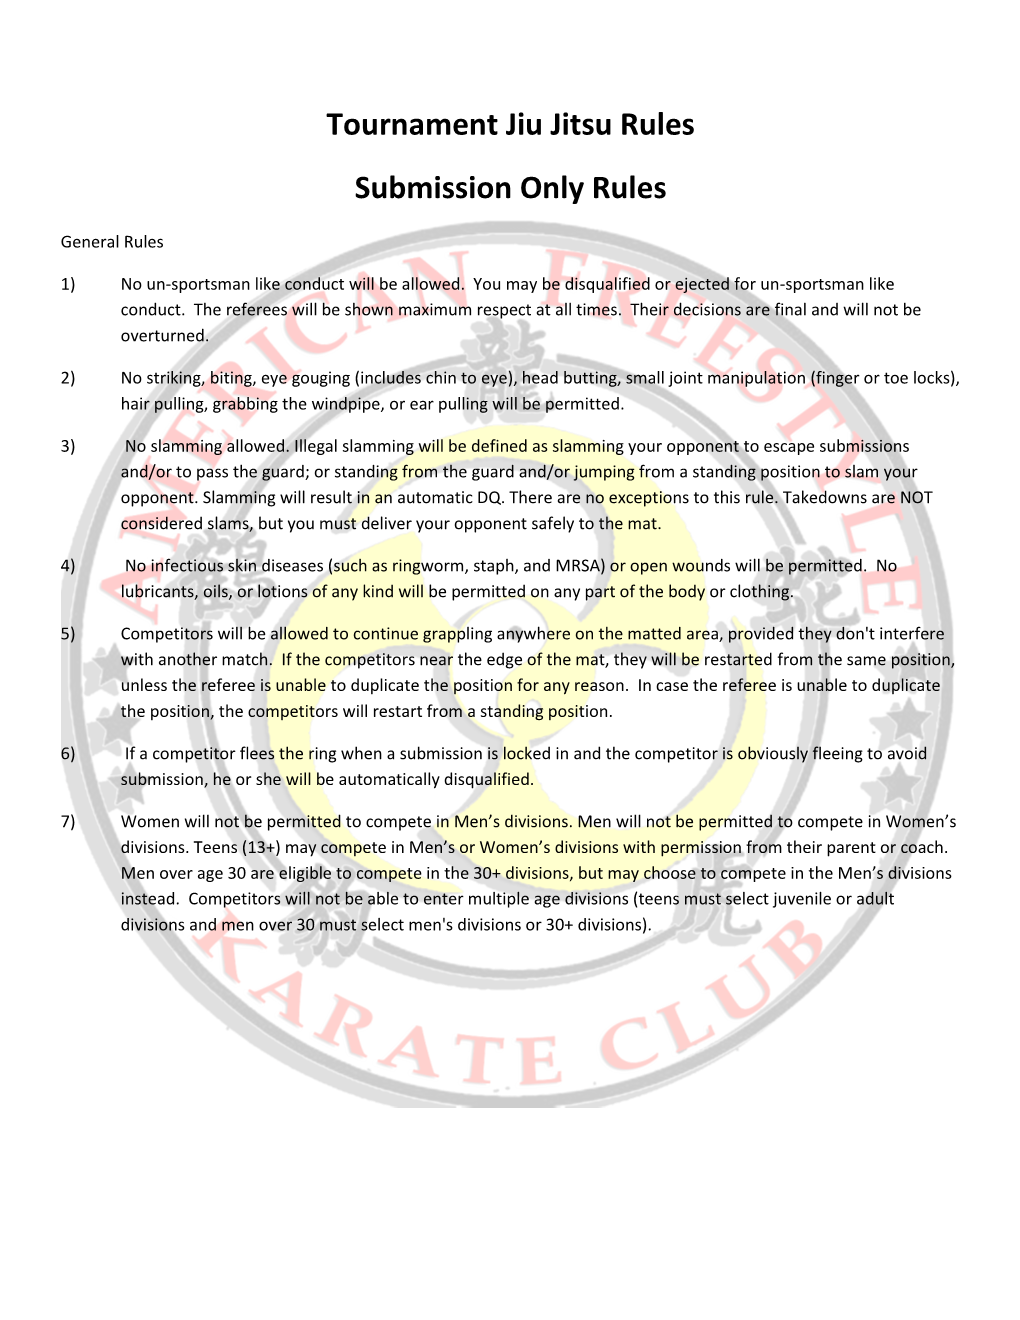 Tournament Jiu Jitsu Rules Submission Only Rules